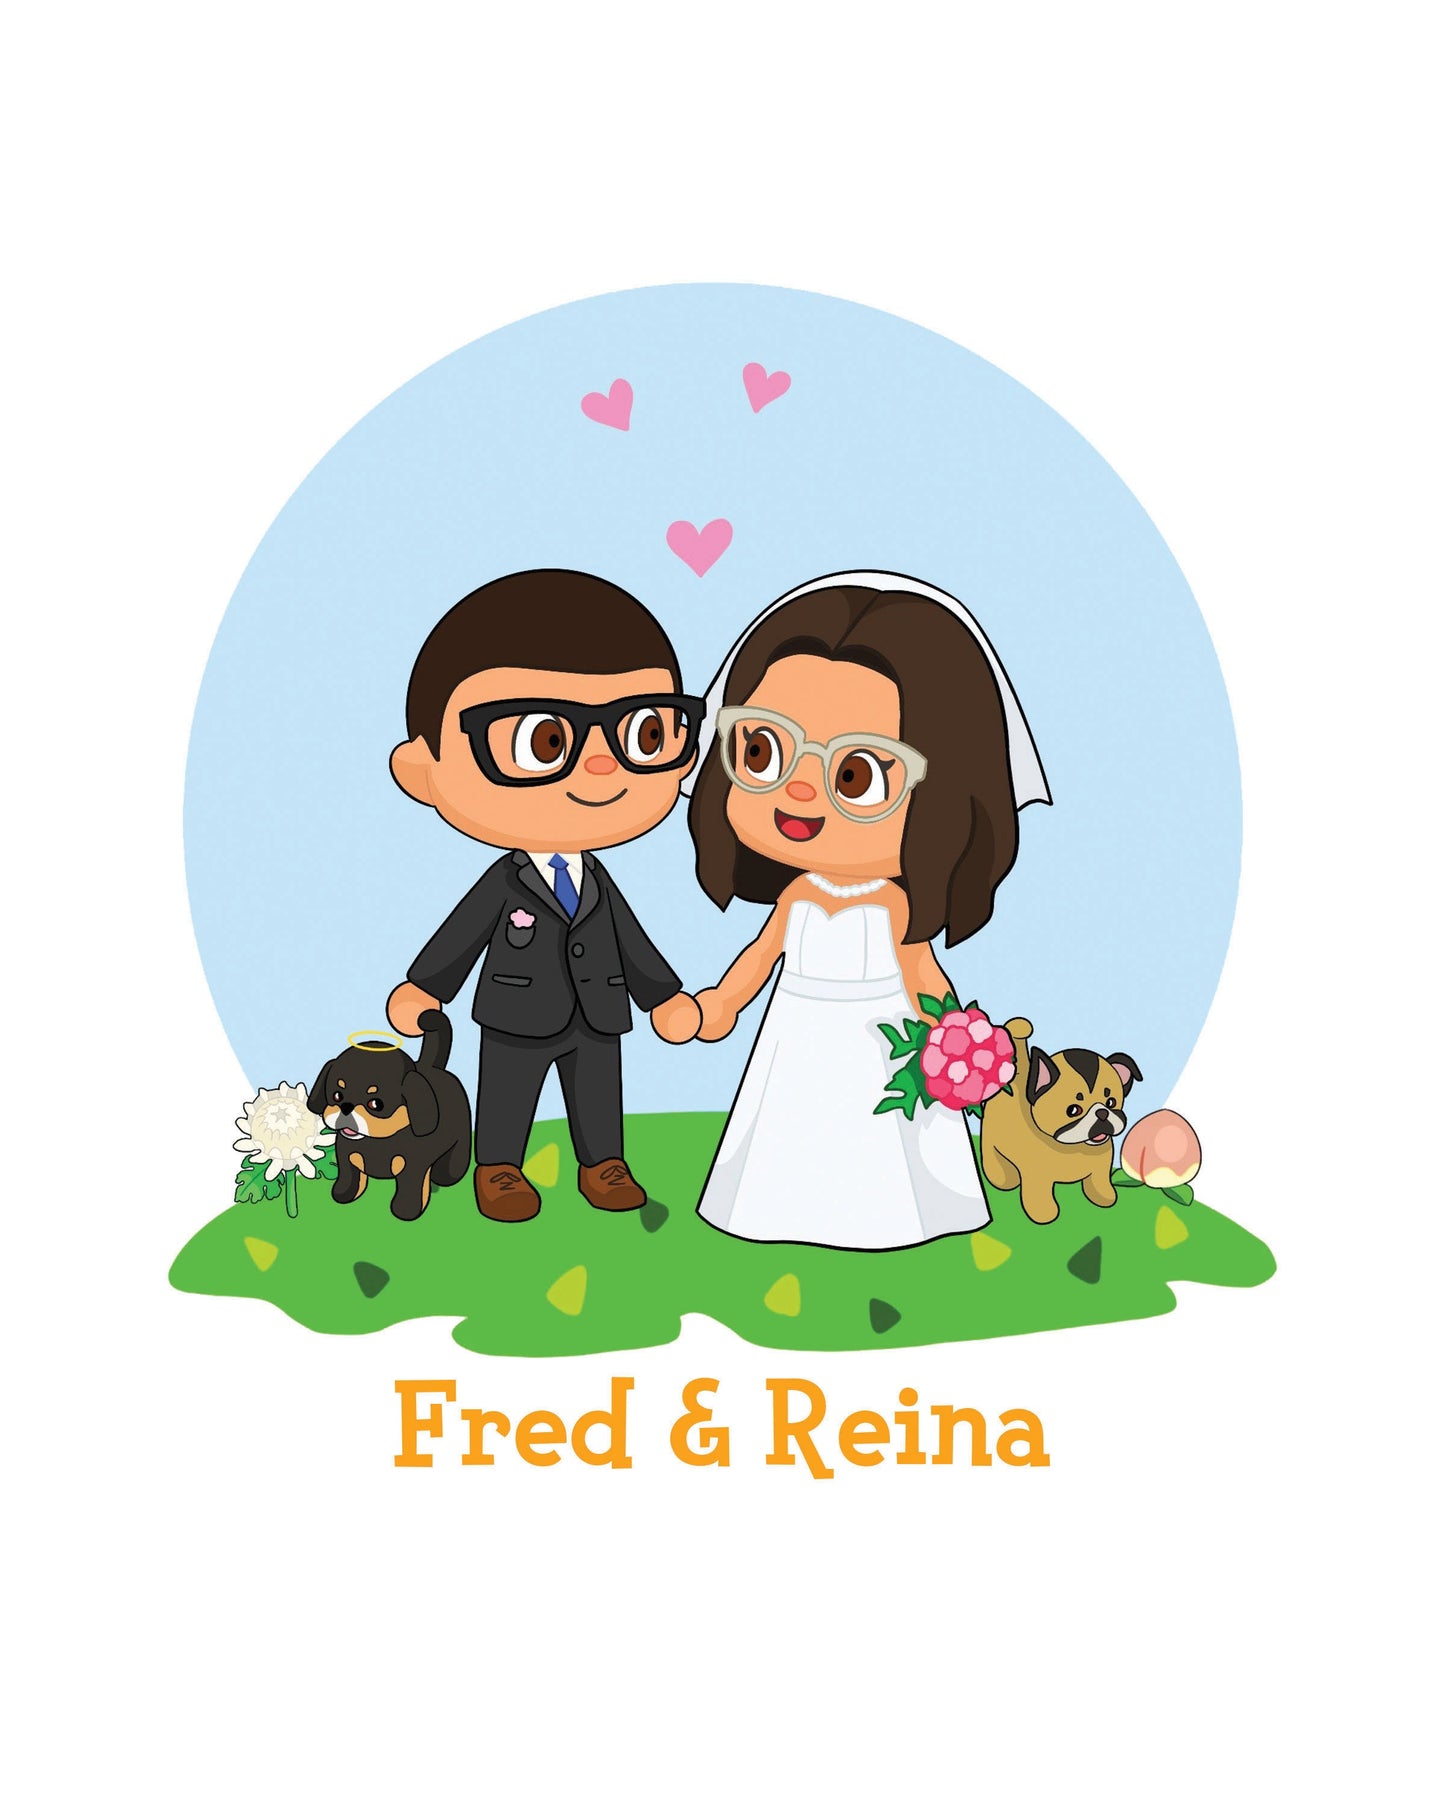 Animal Crossing Portrait - Custom Portrait for Couples and Friends - ACNH - Gift for Gamer - Wedding Gift - Christmas Gift